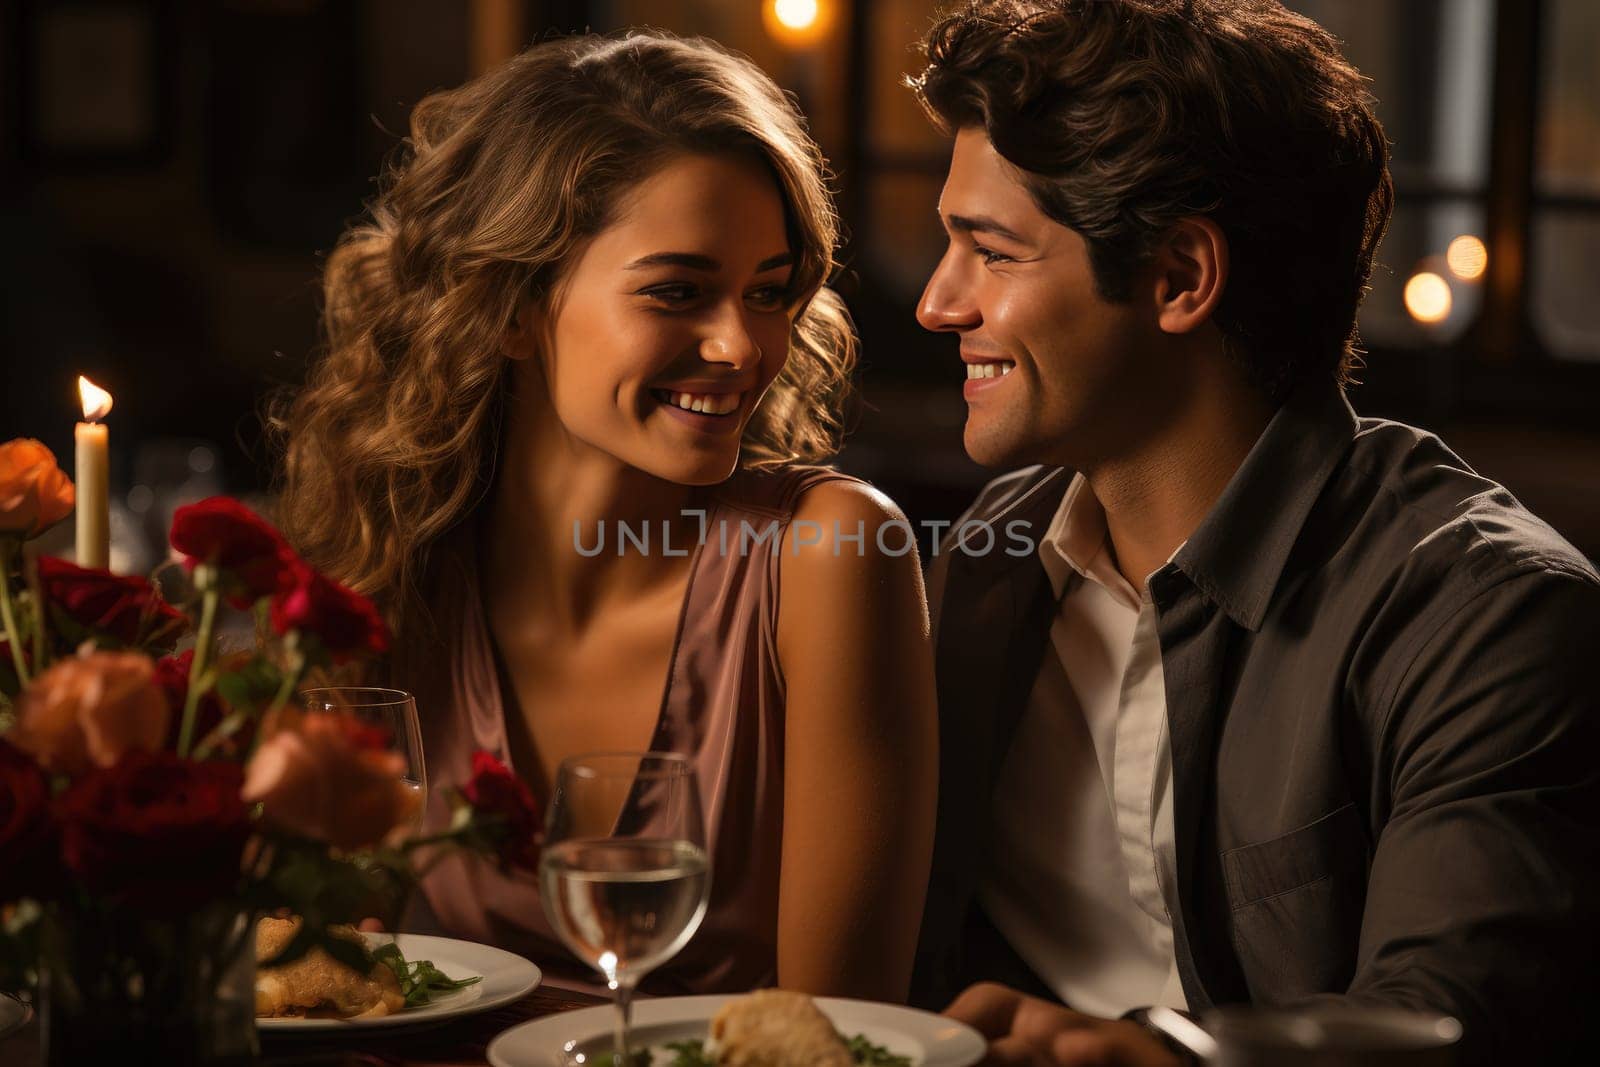 On this Valentine's Day evening, a woman becomes a source of happiness for her husband by having a romantic dinner. It creates an atmosphere of love, taste and tenderness, filling moments with happiness and warmth.